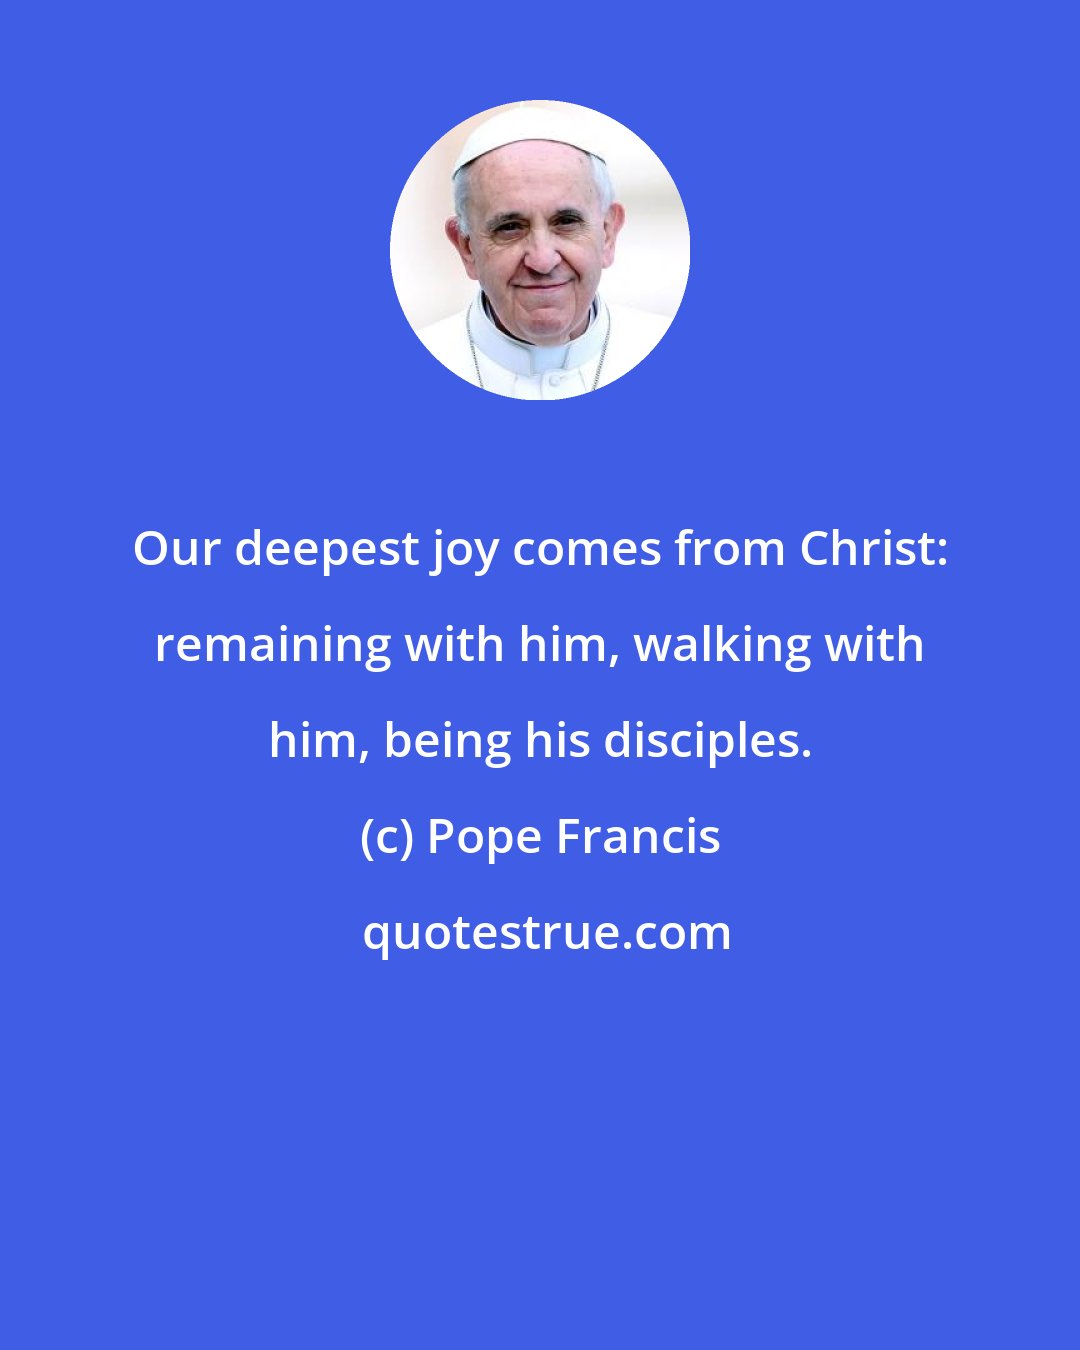 Pope Francis: Our deepest joy comes from Christ: remaining with him, walking with him, being his disciples.